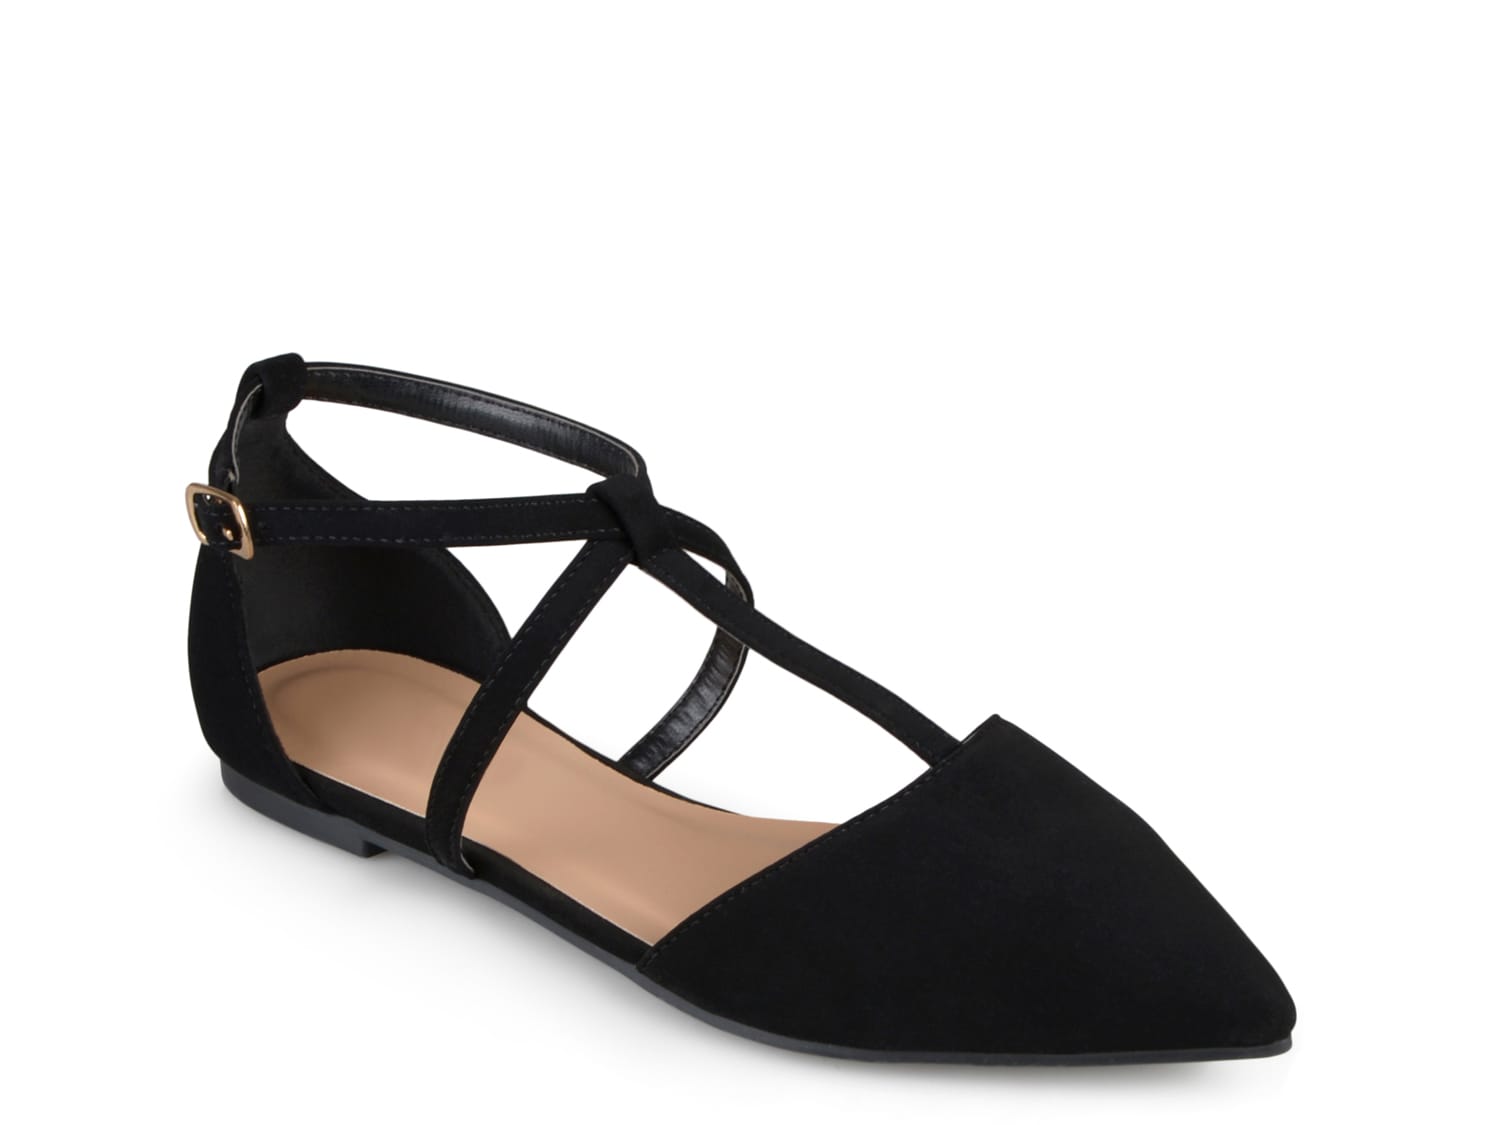 Journee Collection Keiko Flat - Free Shipping | DSW